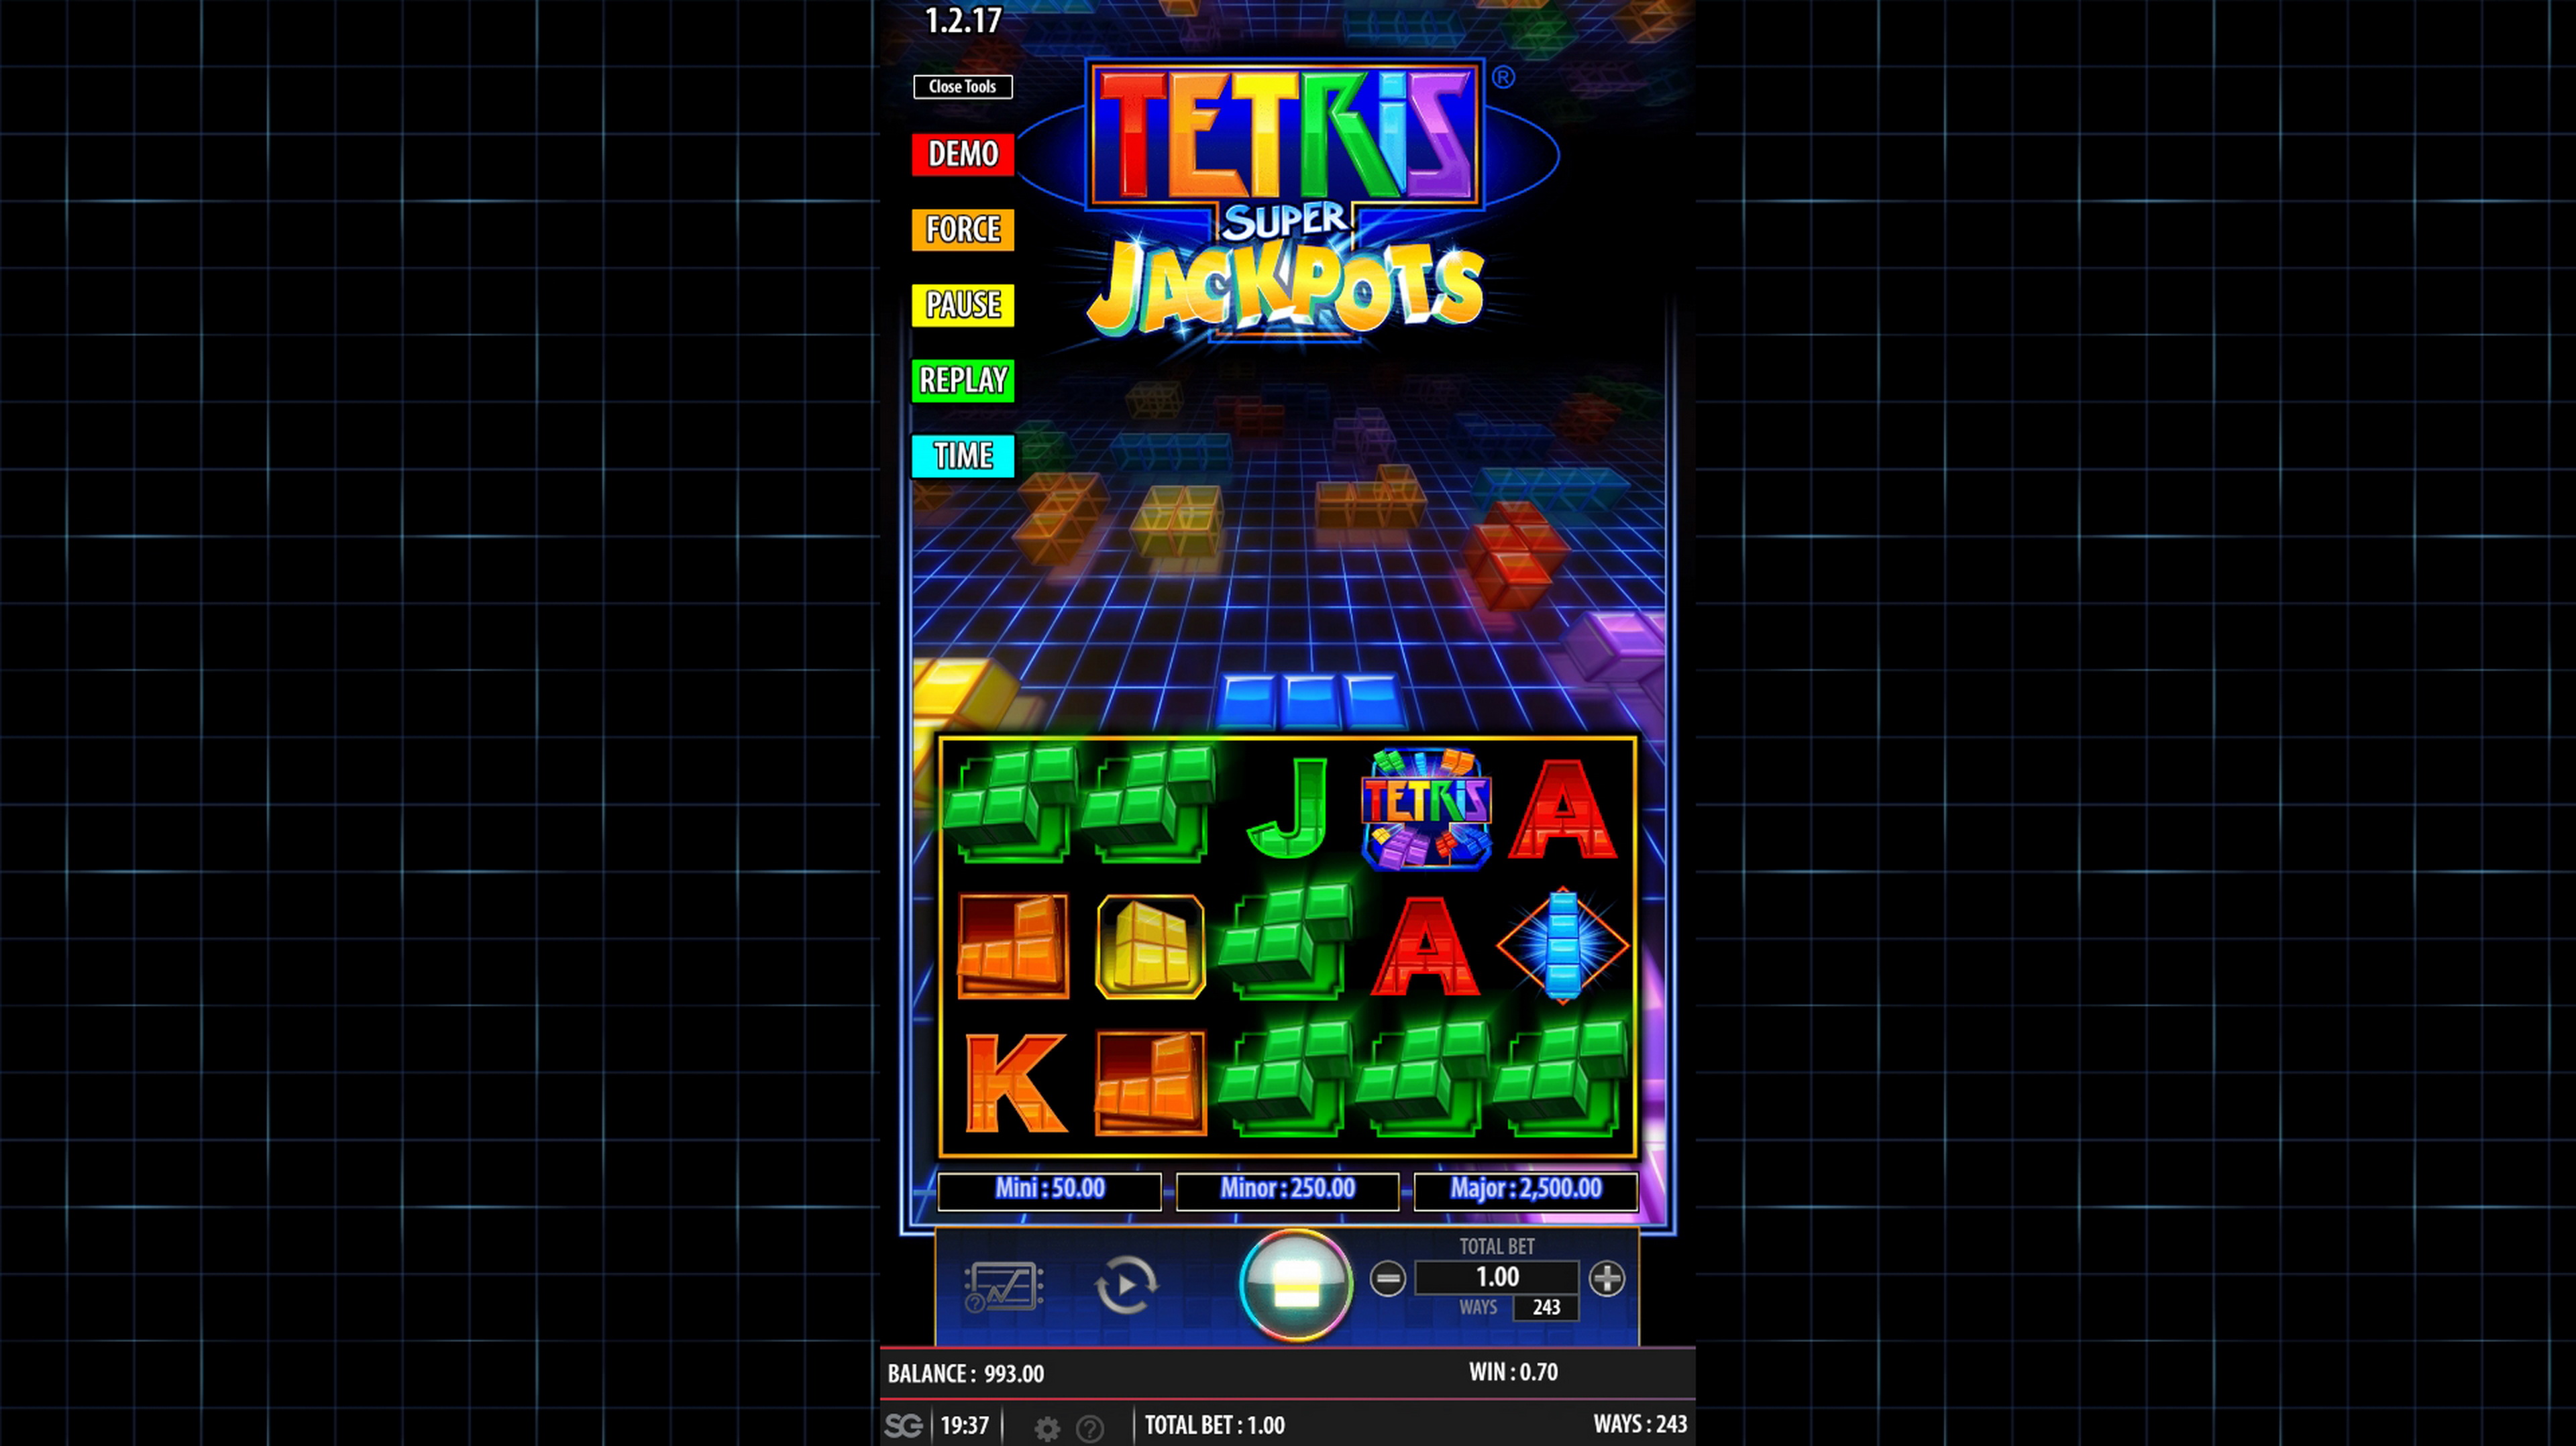 Win Money in Tetris Super Jackpots Free Slot Game by Bally Technologies